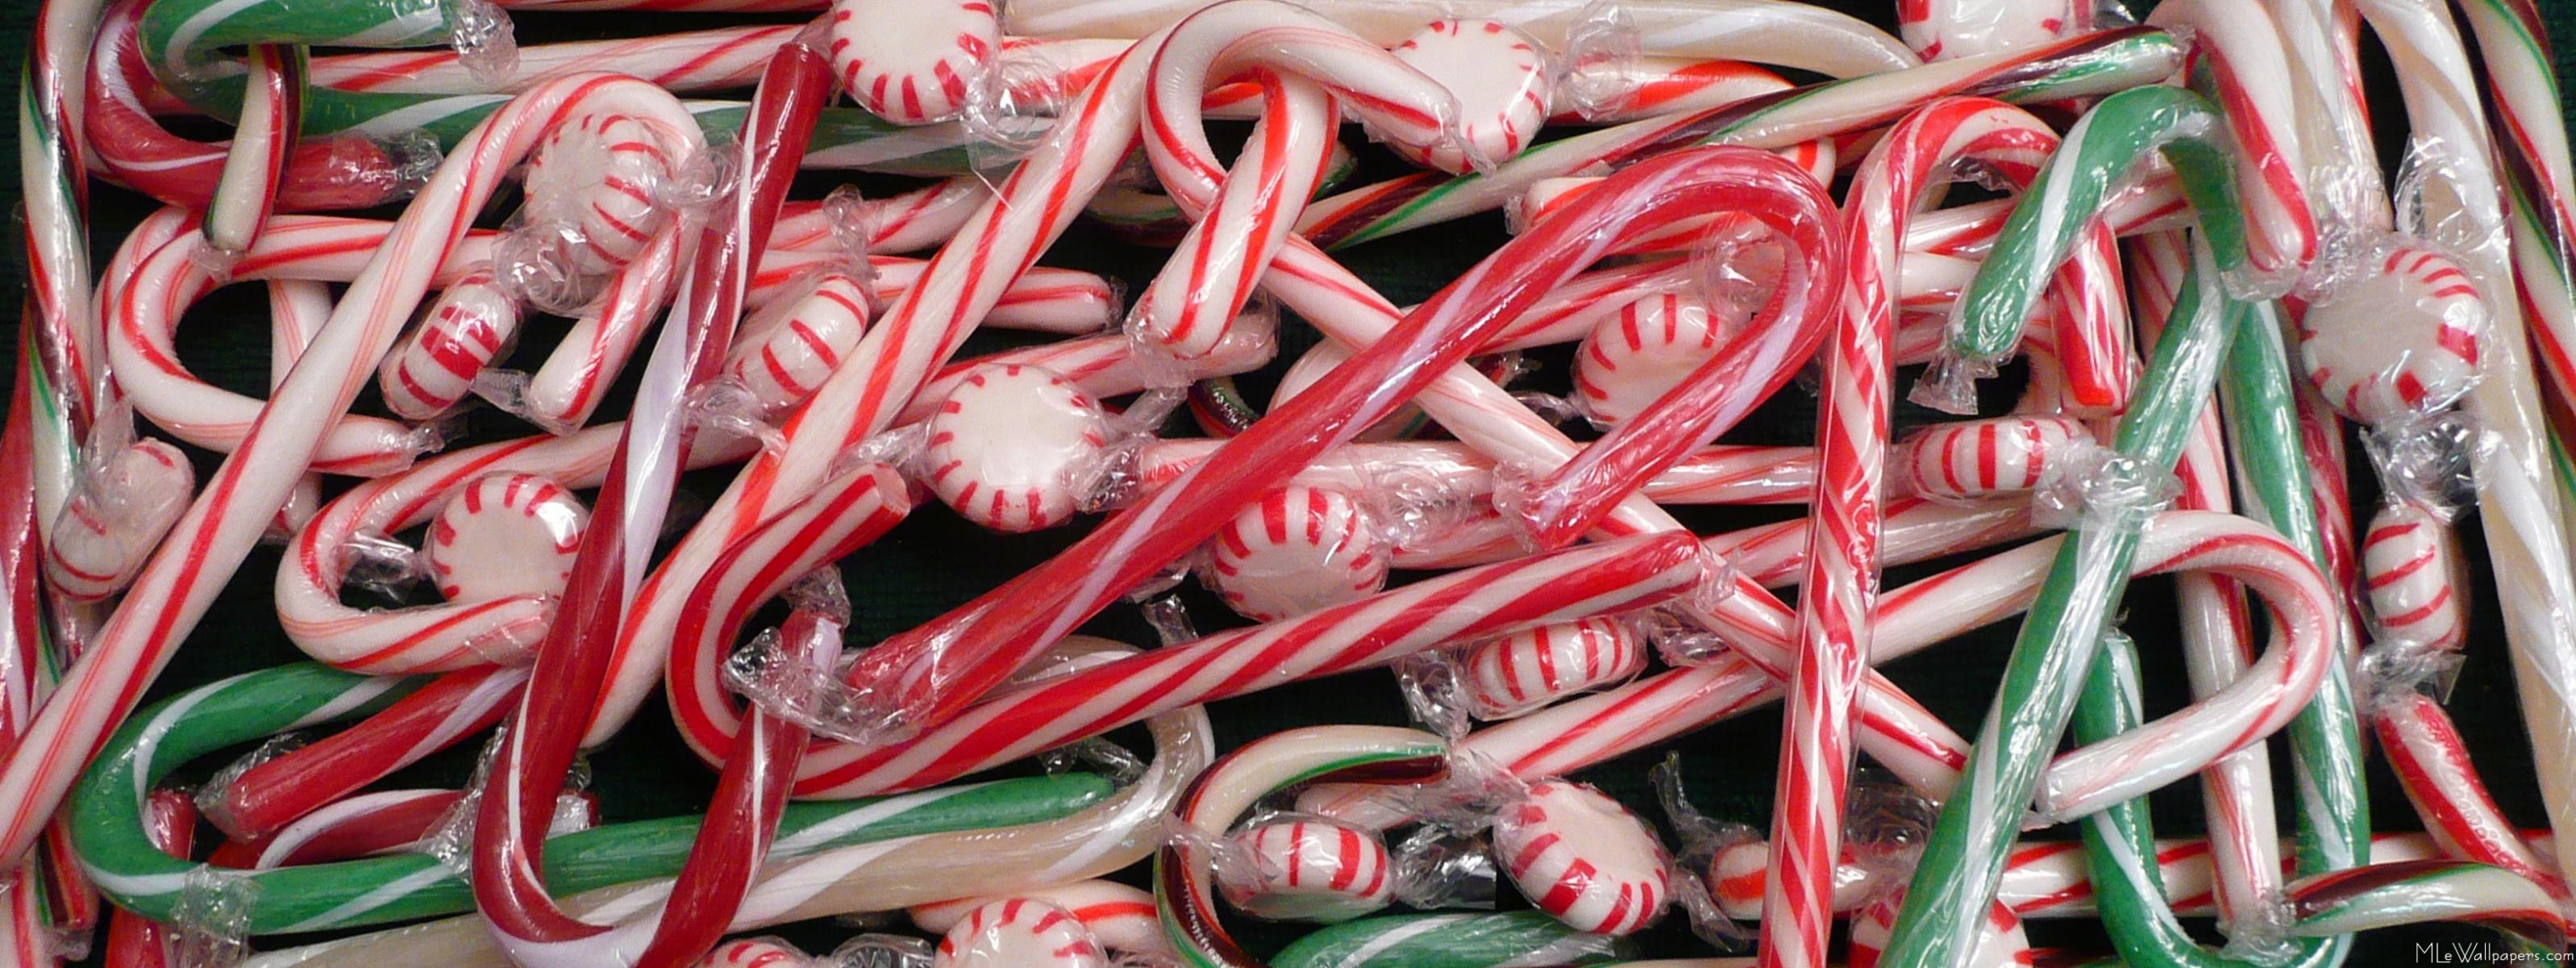 Christmas Candy Wallpaper
 MLeWallpapers Candy Canes and Peppermints